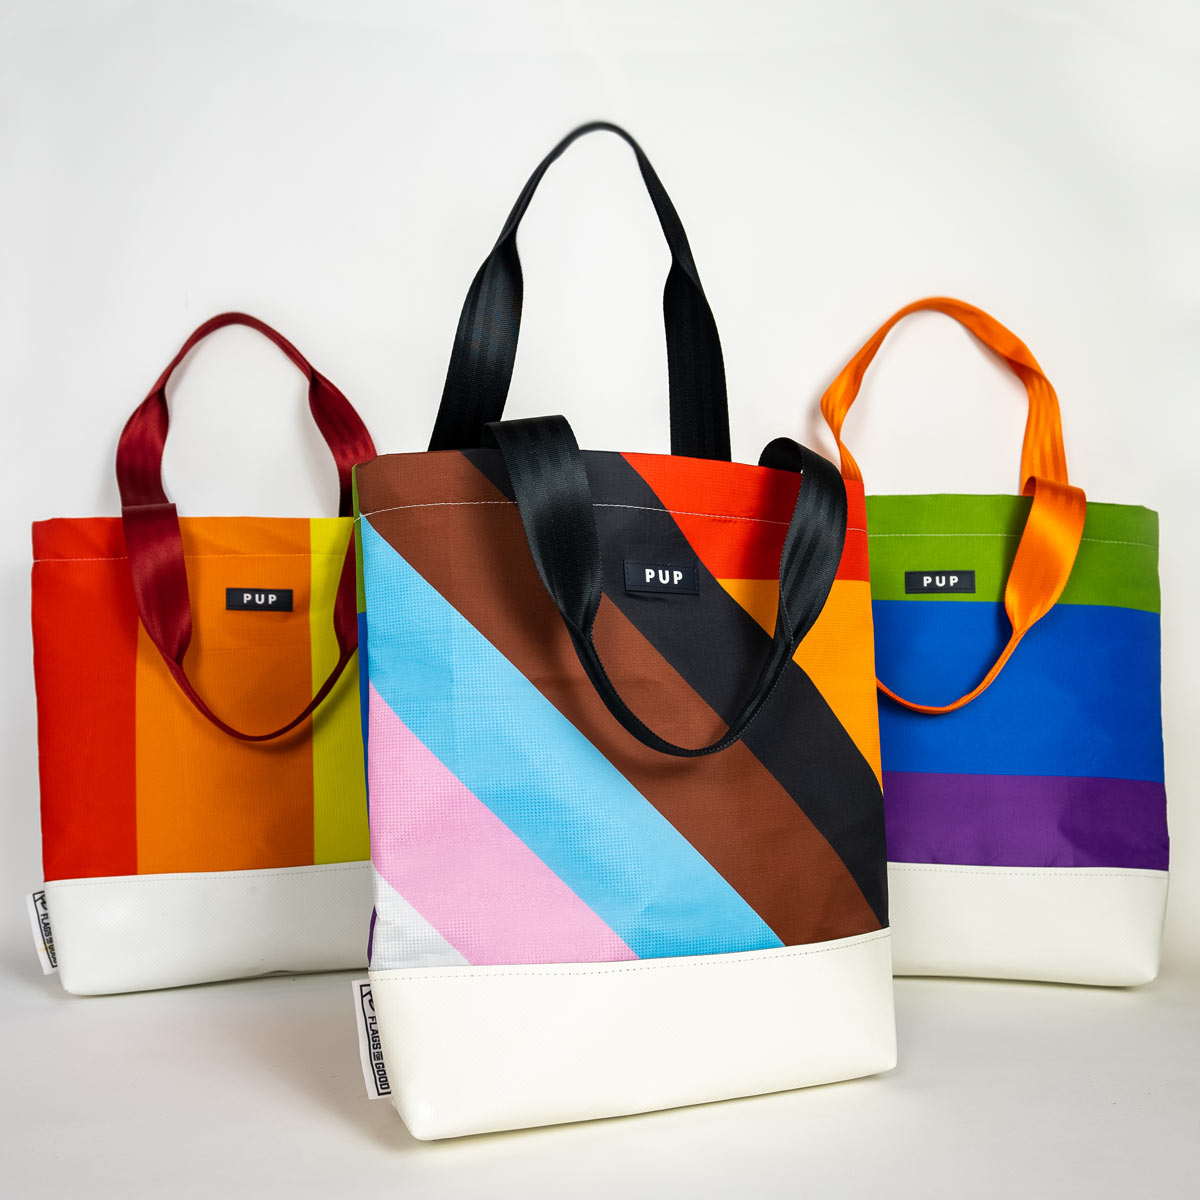 Upcycled Progress Pride Flag Tote Bag Group Shot - Flags For Good X PUP